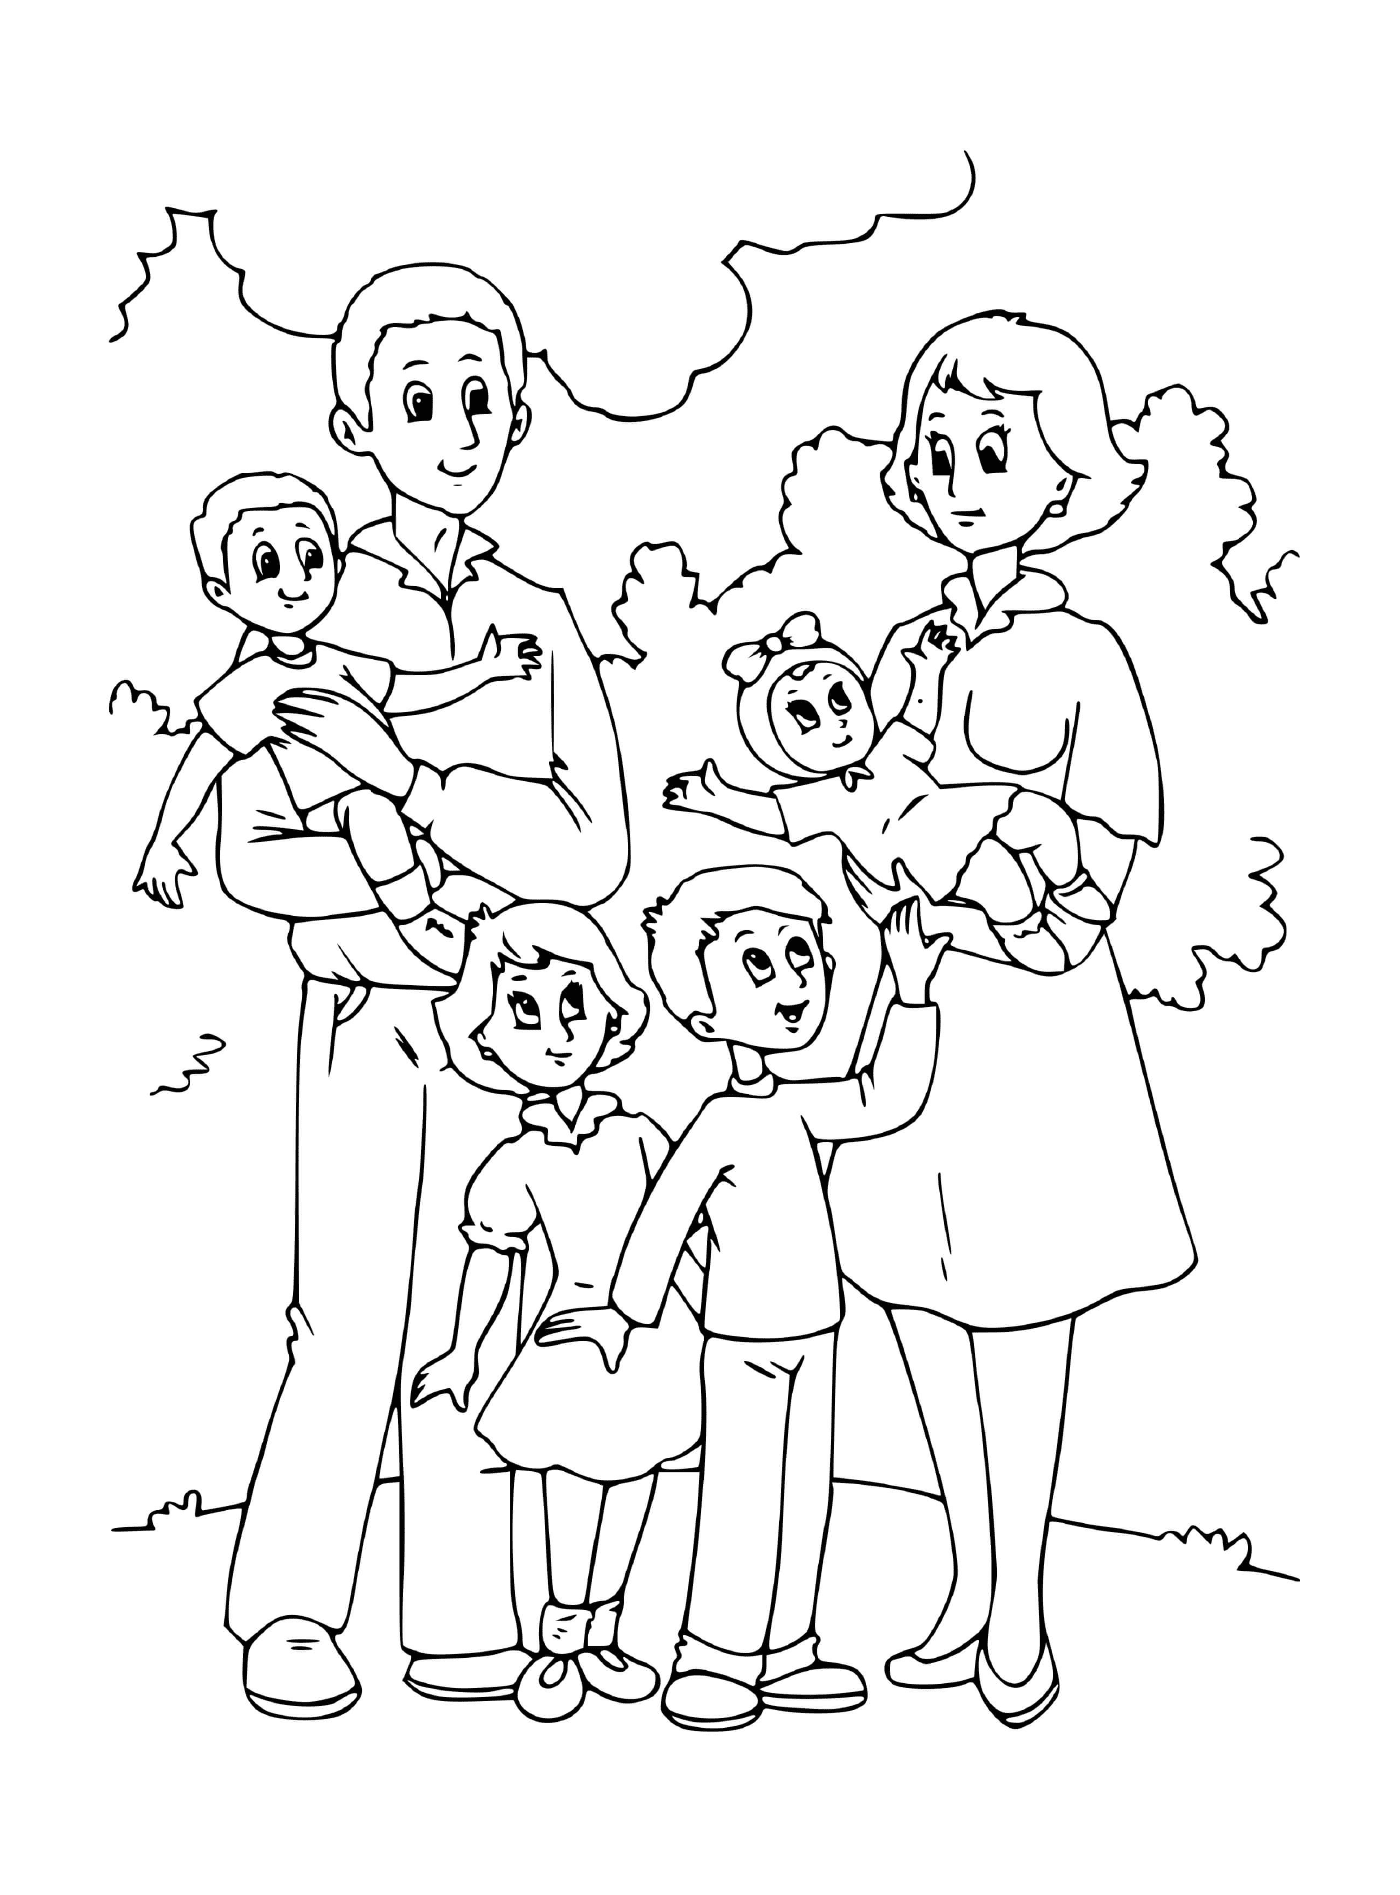  A family with several children and their parents 